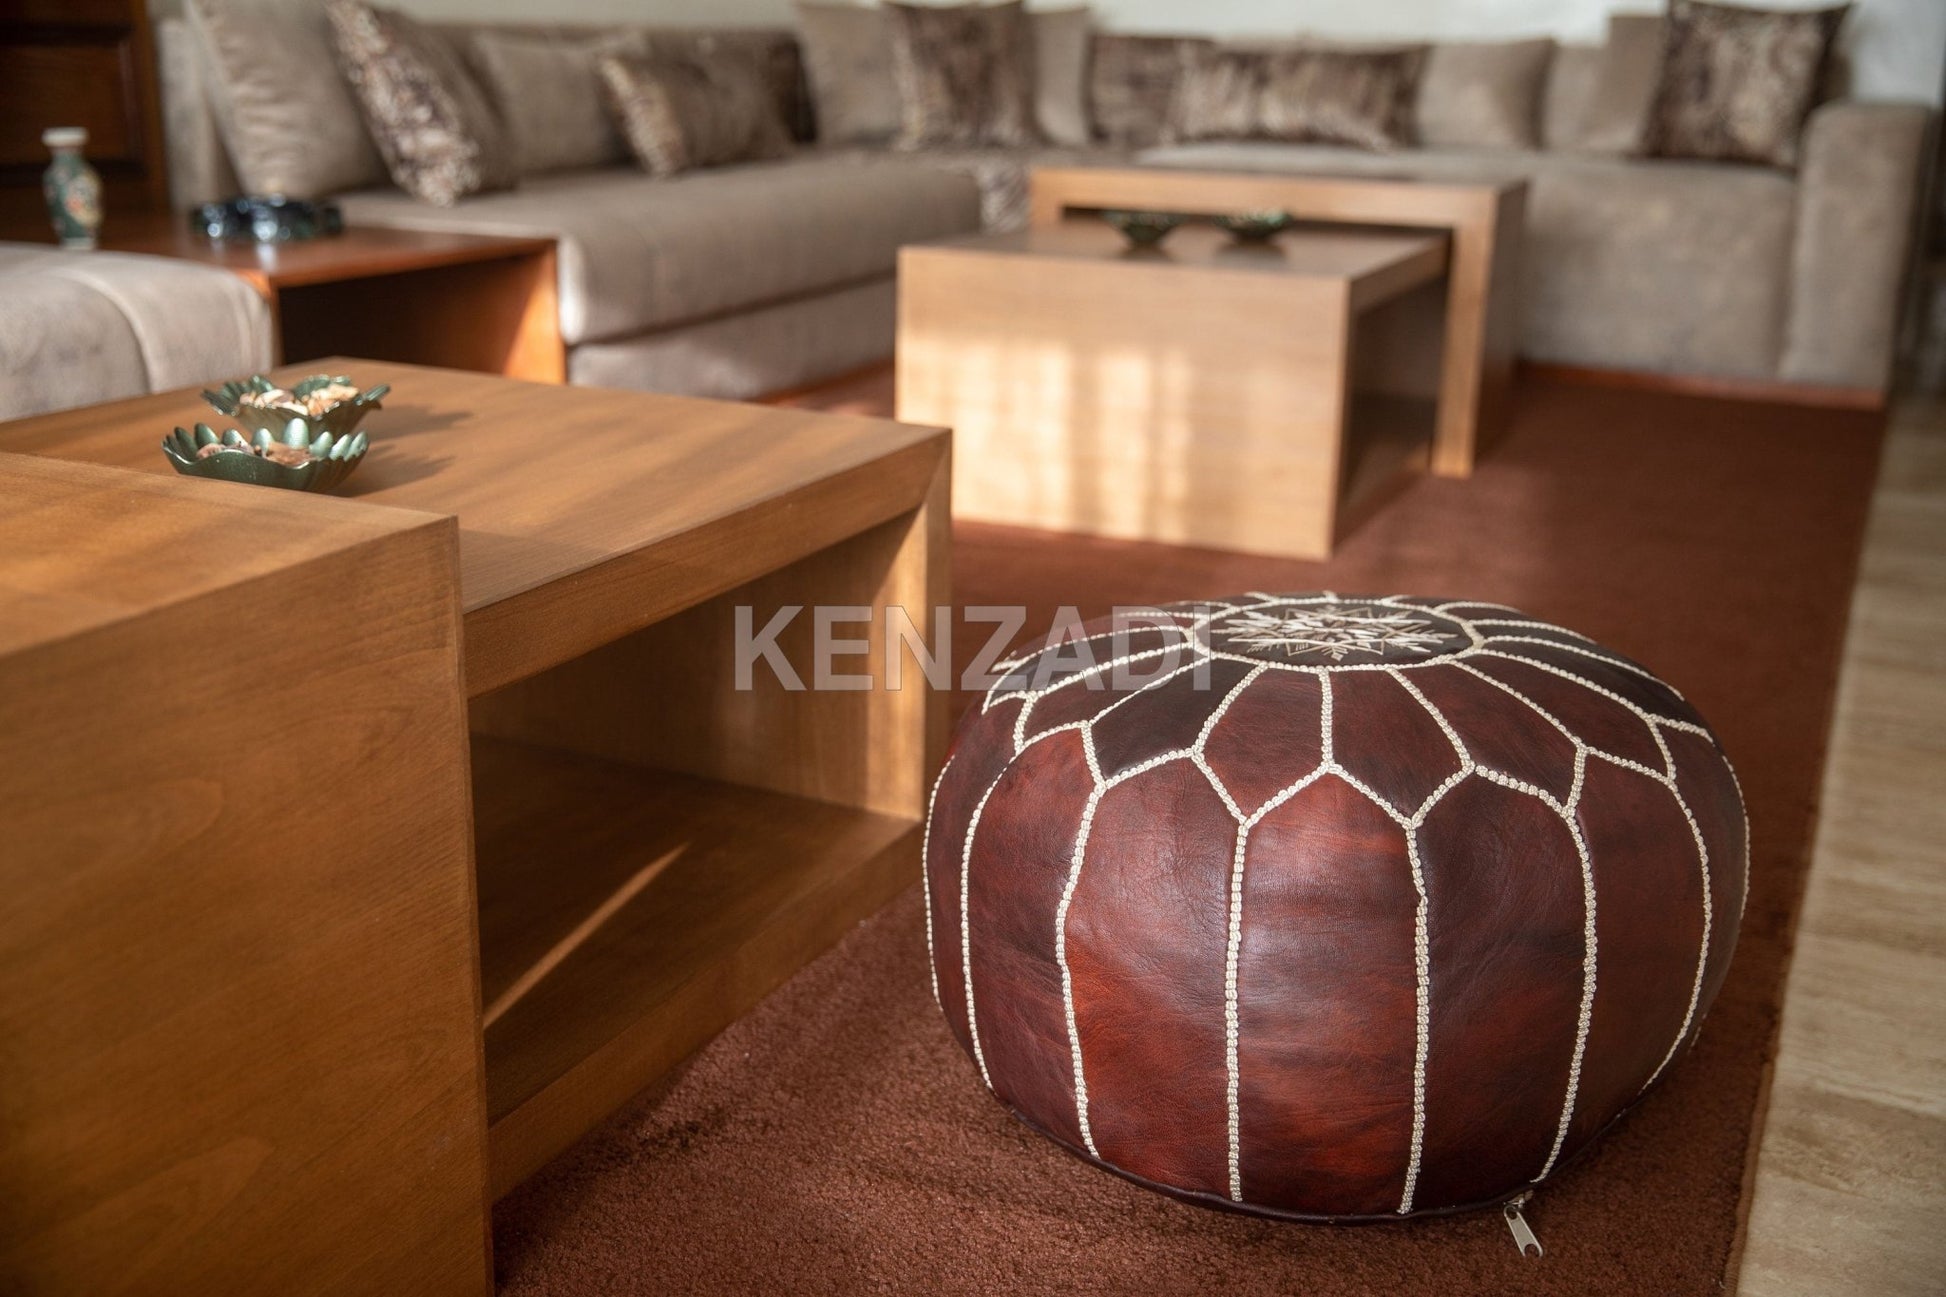 Authentic Moroccan leather pouf with beige embroidery, dark brown color, hand-sewn, perfect for adding a bohemian touch to your home decor